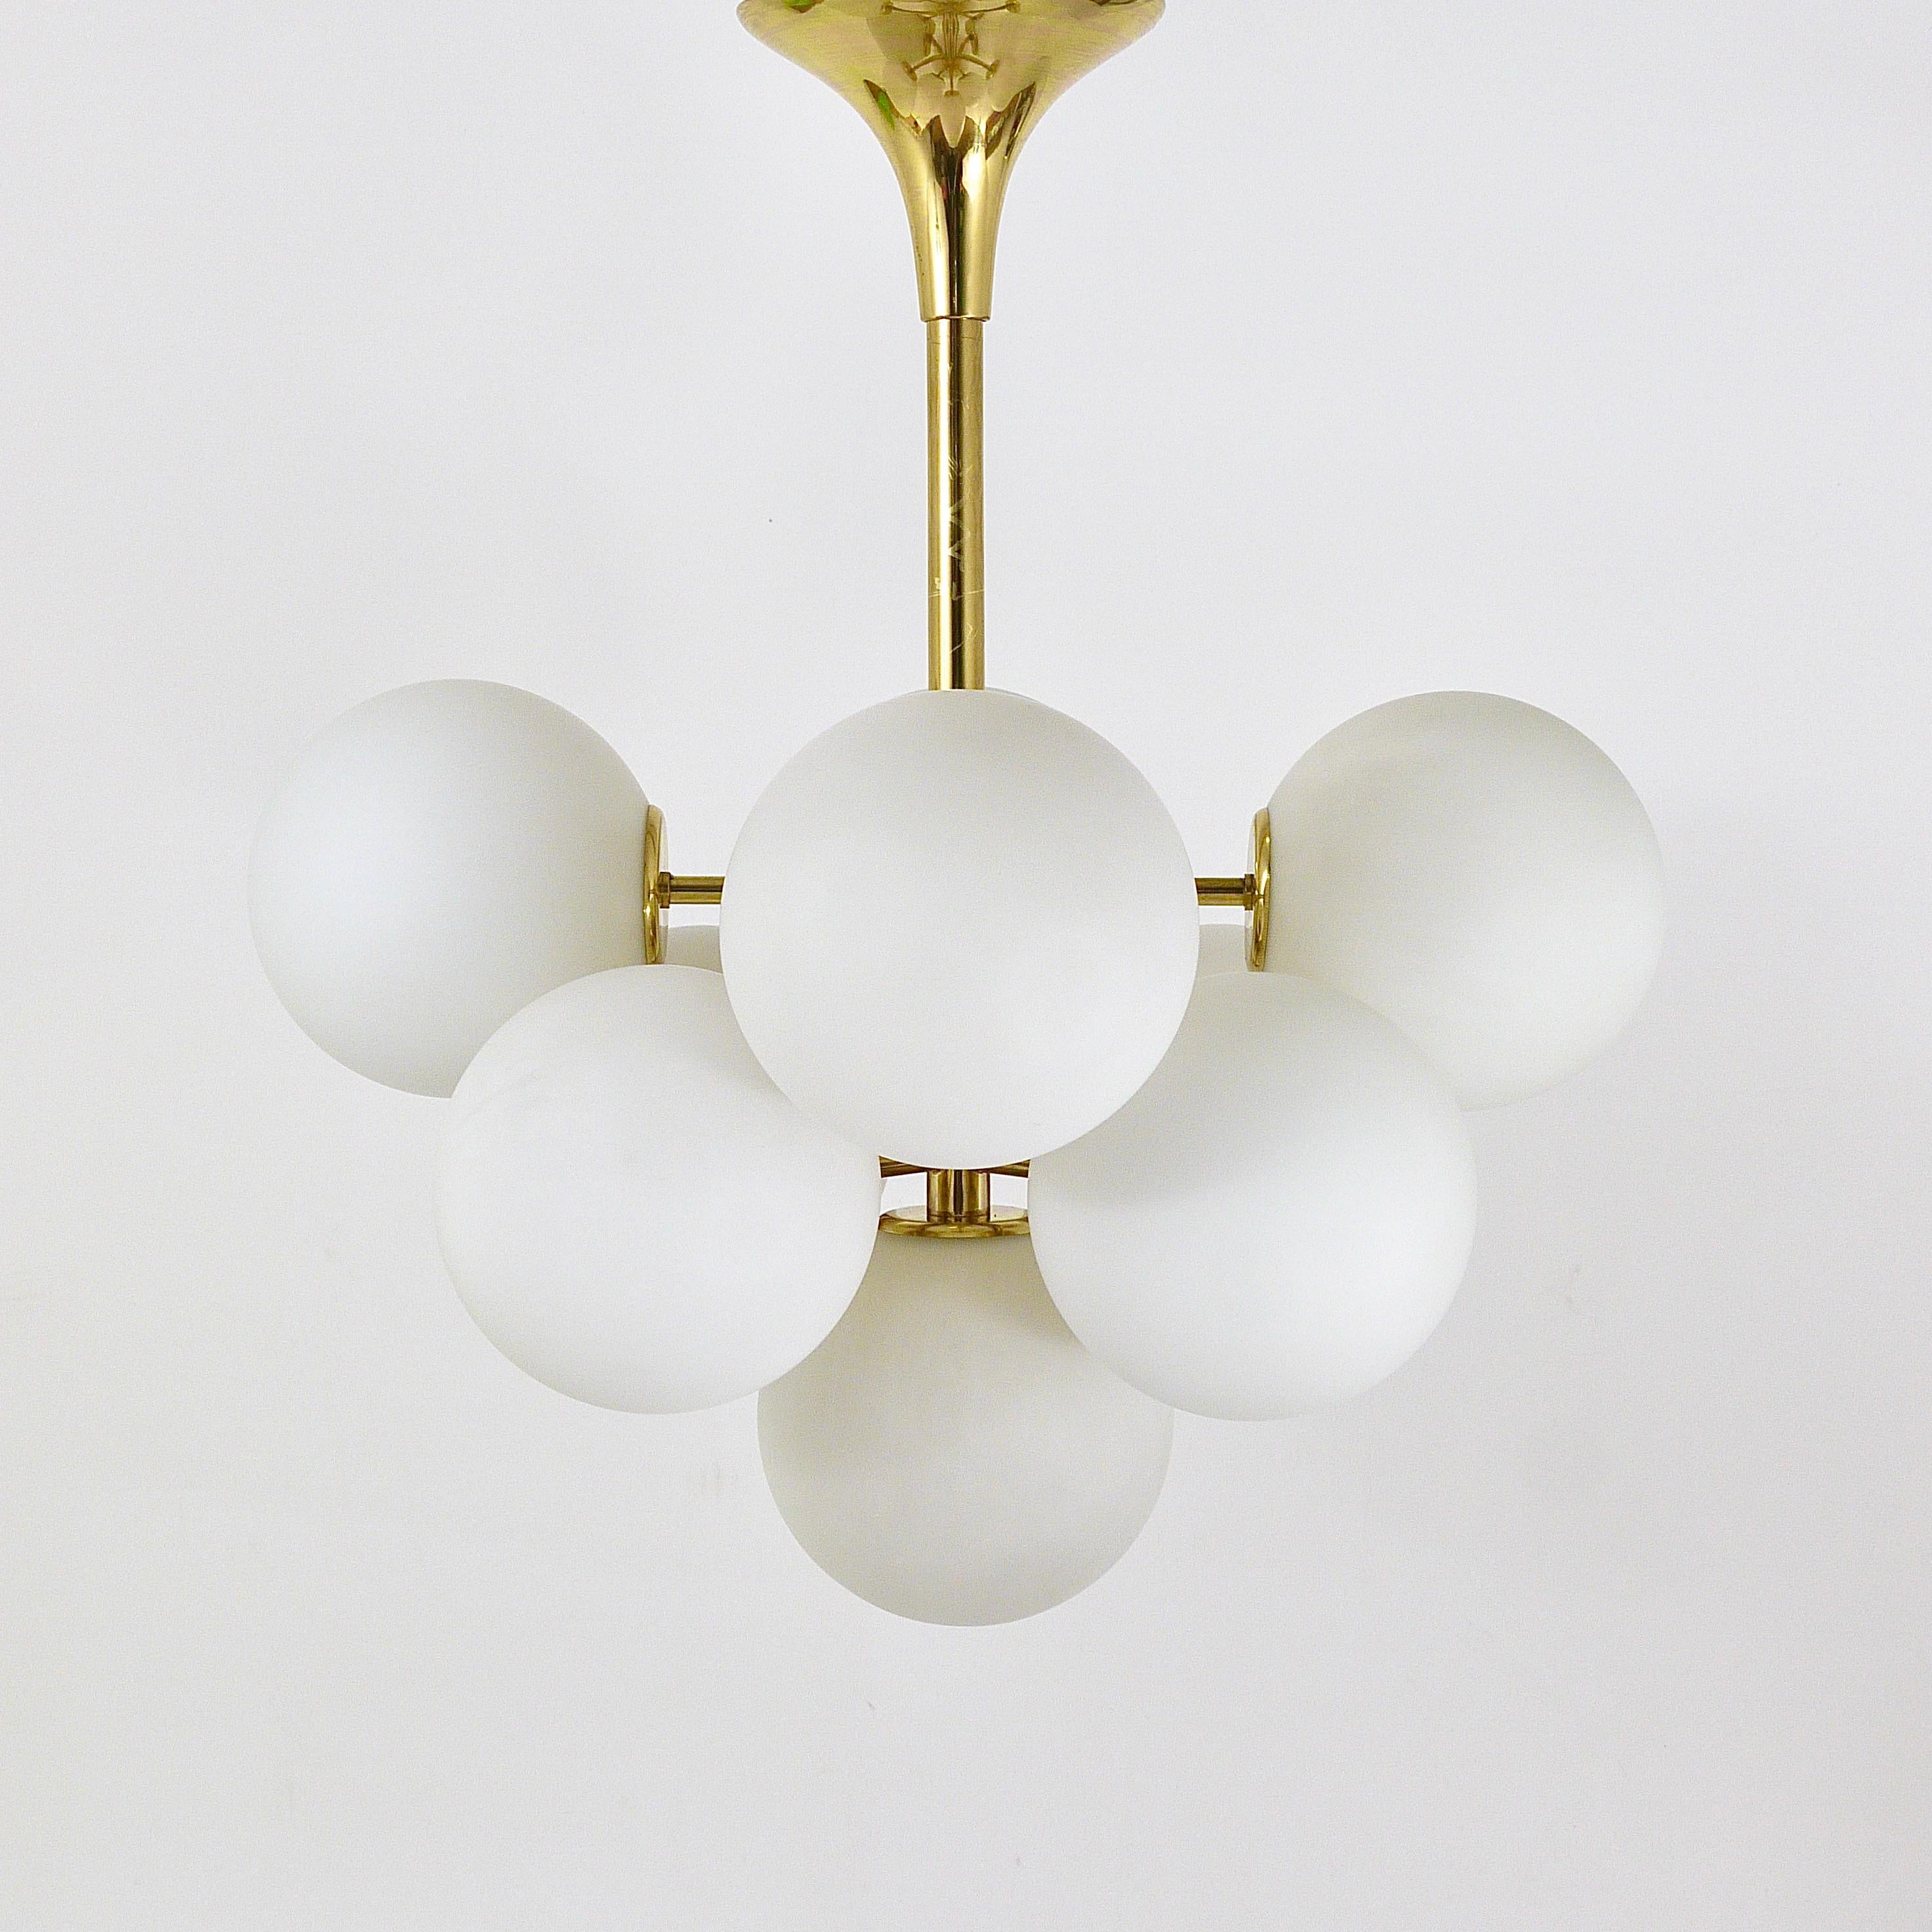 A stylish 1960s Space Age Atomic Sputnik-style chandelier. In the style of E. R. Nele, executed by Temde, Switzerland. Brass hardware with a tulip canopy and nine white frosted hand blown glass globe shades. In good condition with some patina on the